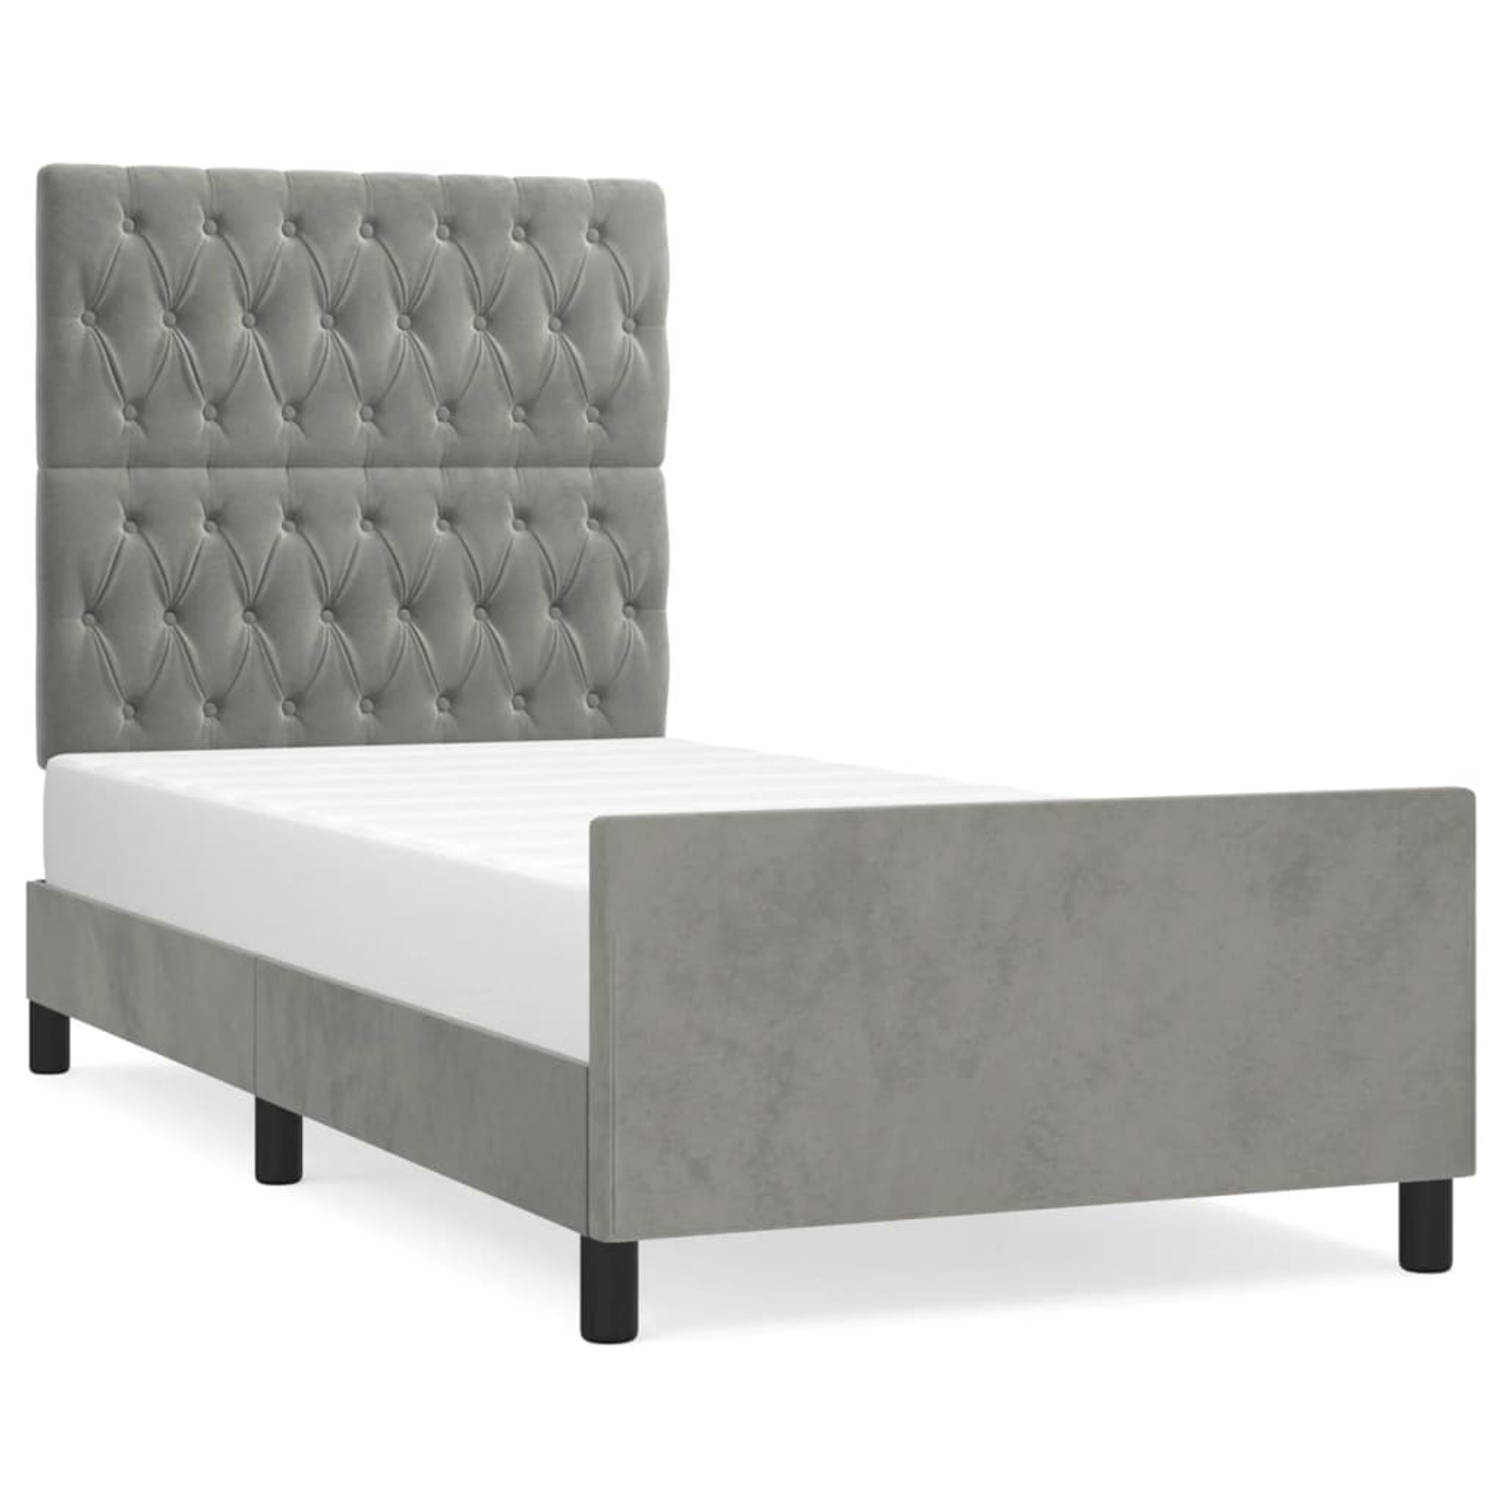 The Living Store Bedframe - Light Grey - 203 x 103 x 118/128 cm - Adjustable Height - Velvet - Sturdy Legs - Plywood Slats - Comfortable Support - Mattress Not Included